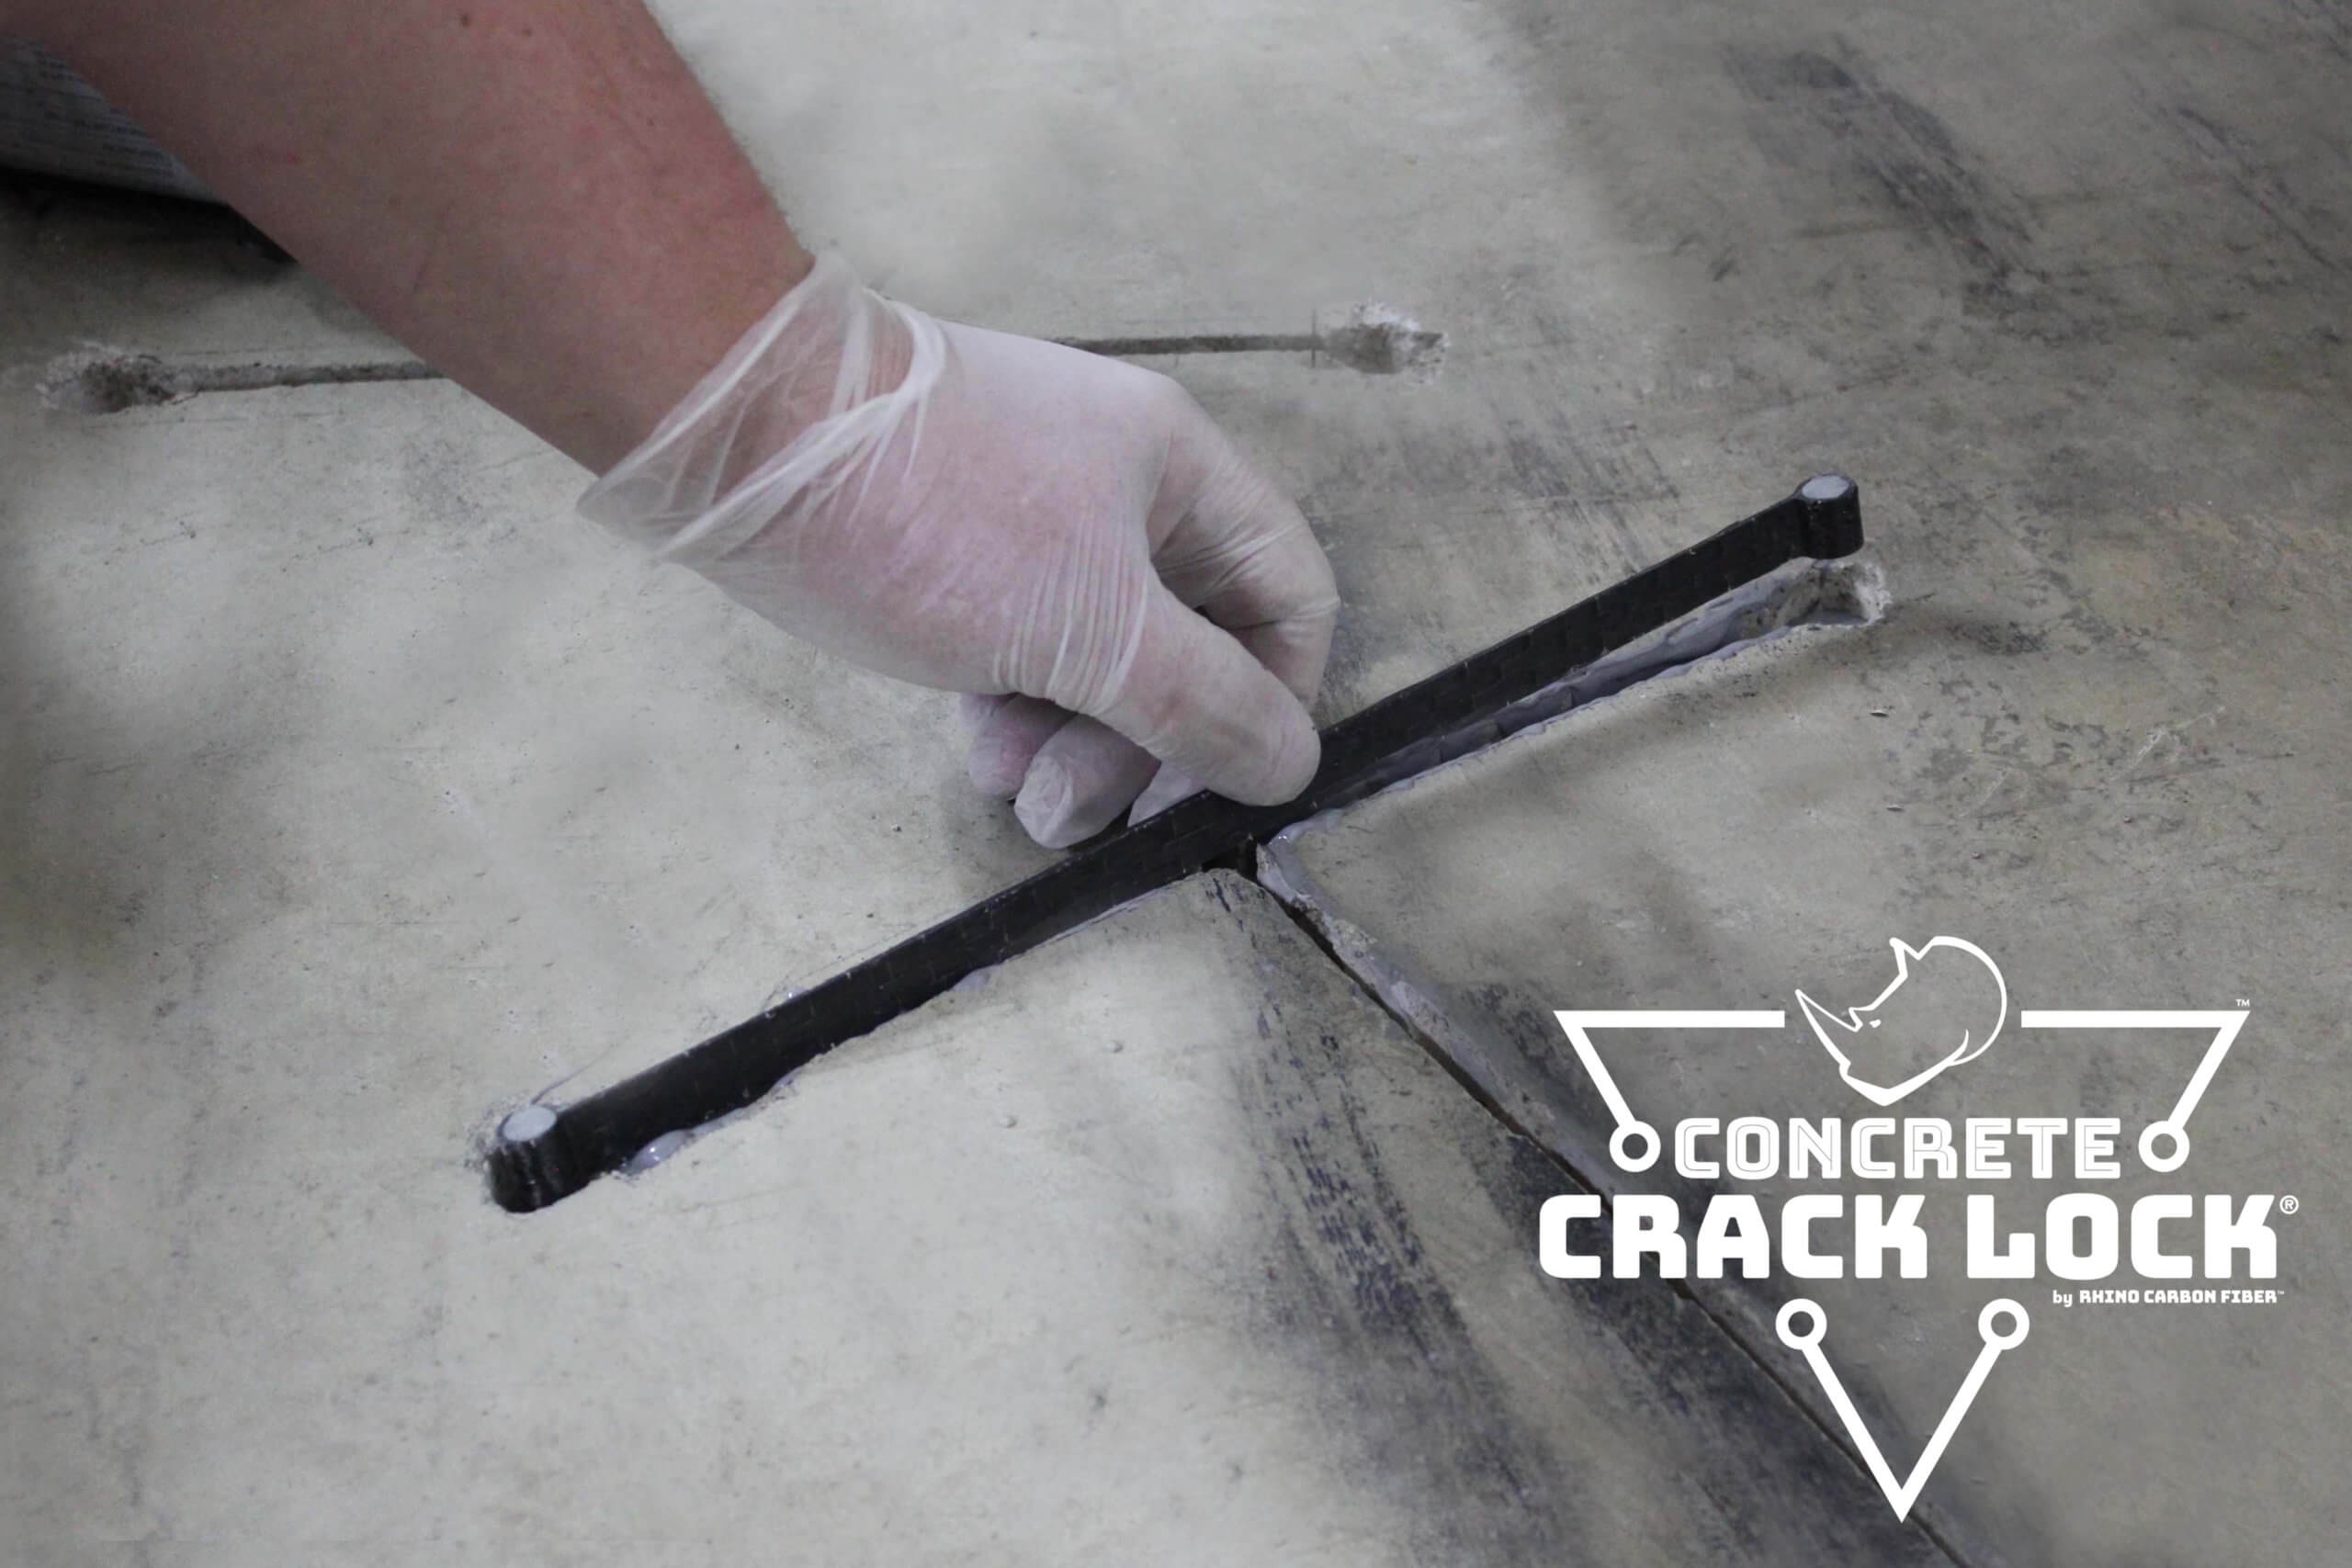 Image showing Rhino's Concrete Crack Lock in use